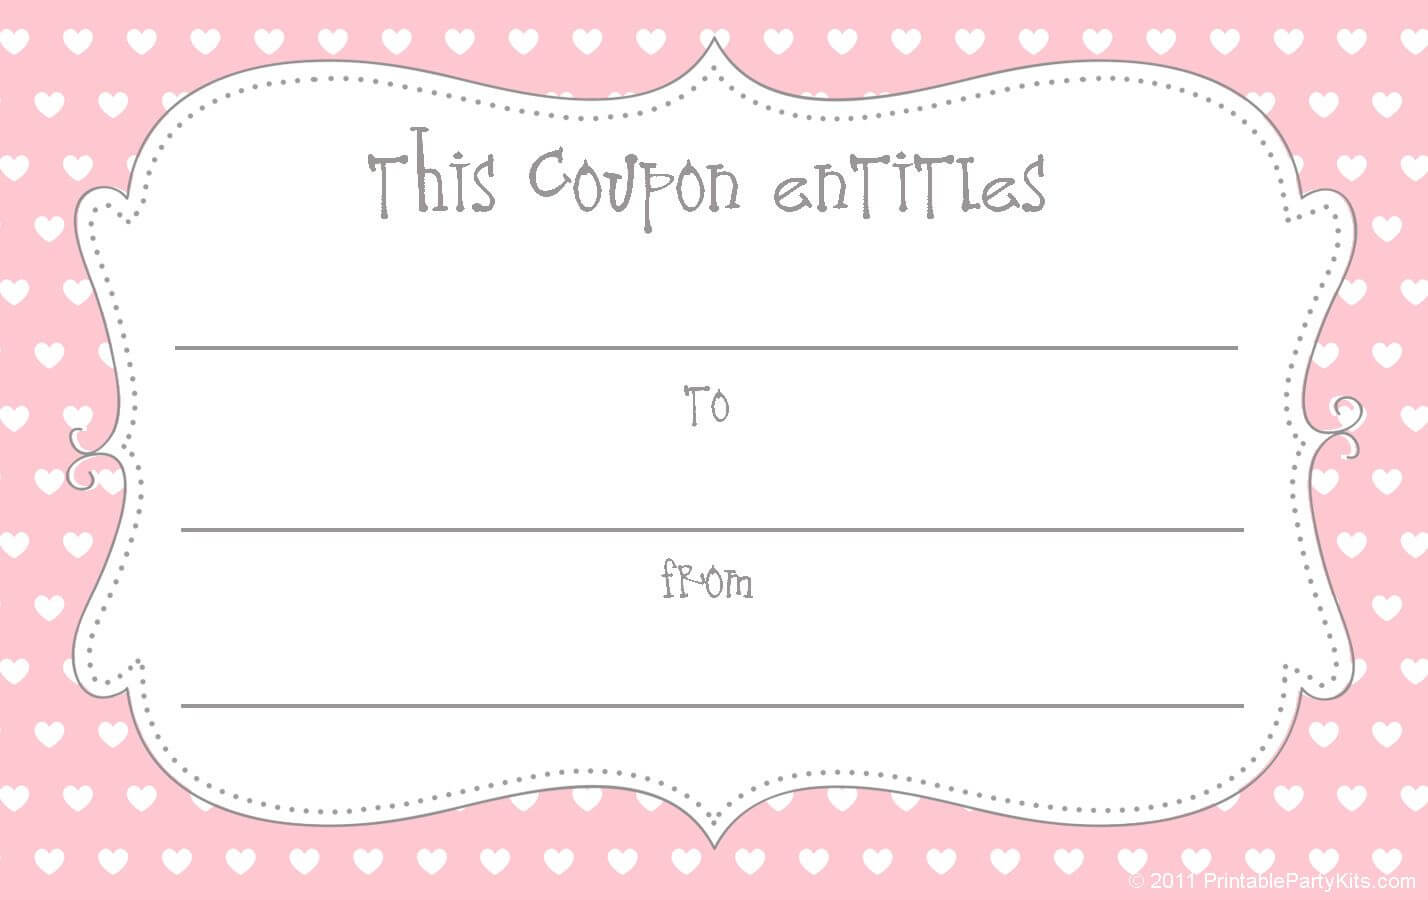 Early Play Templates: Free Gift Coupon Templates To Print With Homemade Christmas Gift Certificates Templates